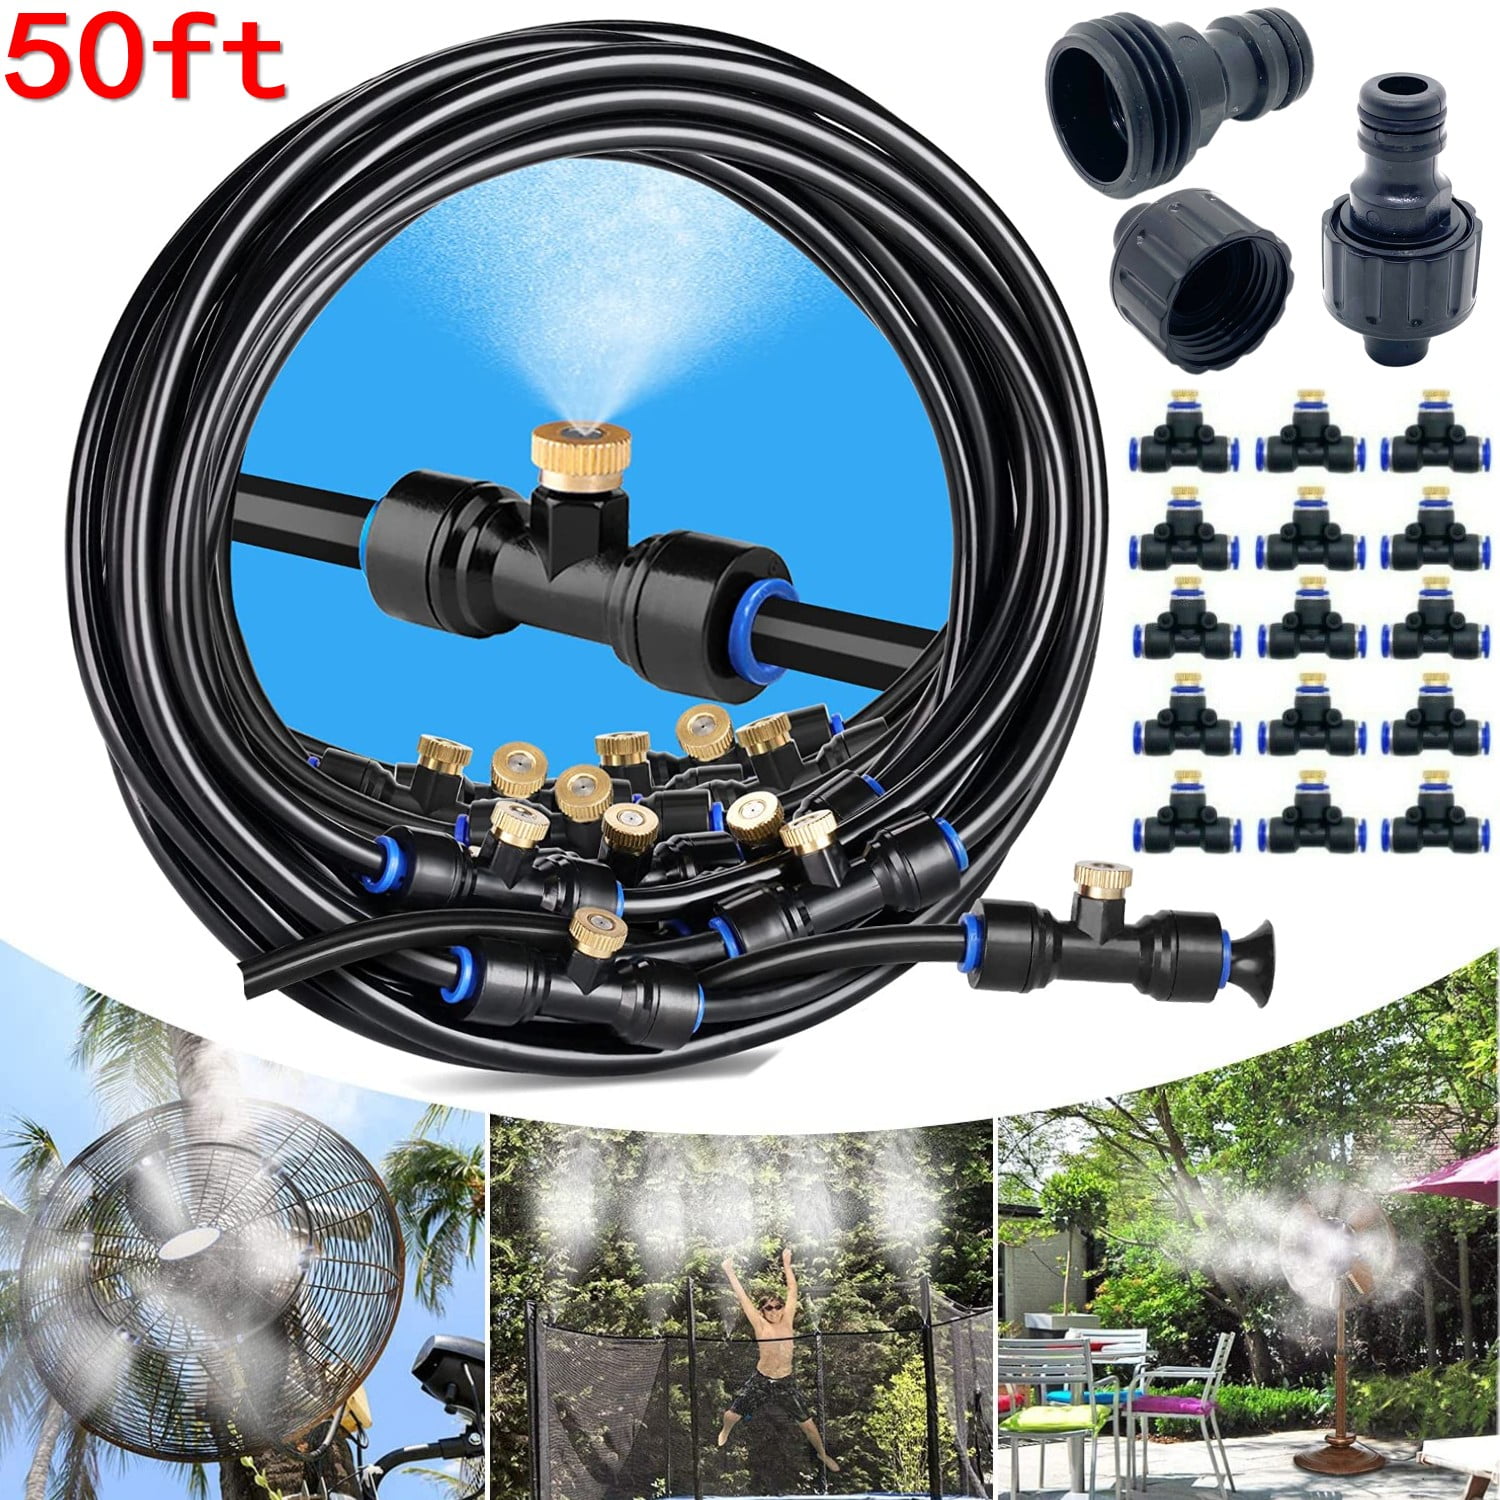 Fog Nozzle Watering Irrigation System Kit Portable Misting Cooling Automatic New 